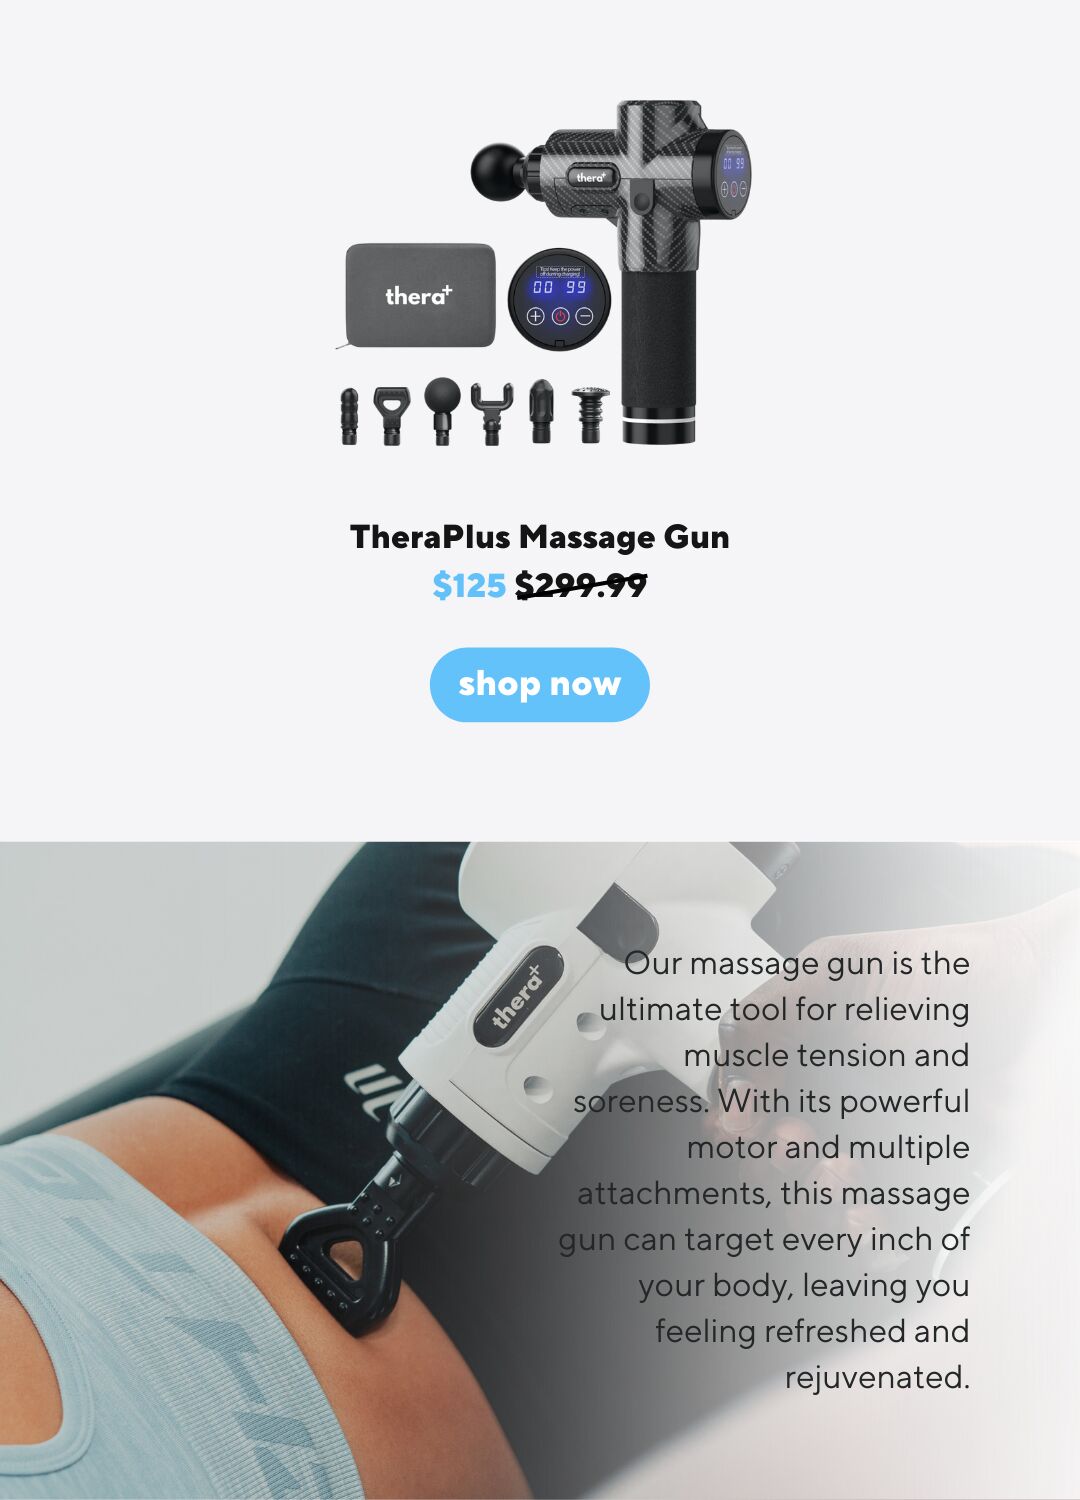  IPeYIT TheraPlus Massage Gun $125 299:99 A !ur massage gun is the ultimate tool for relieving le tension and itth its powerful otor and multiple this massage every inch of , leaving you efreshed and rejuvenated. 